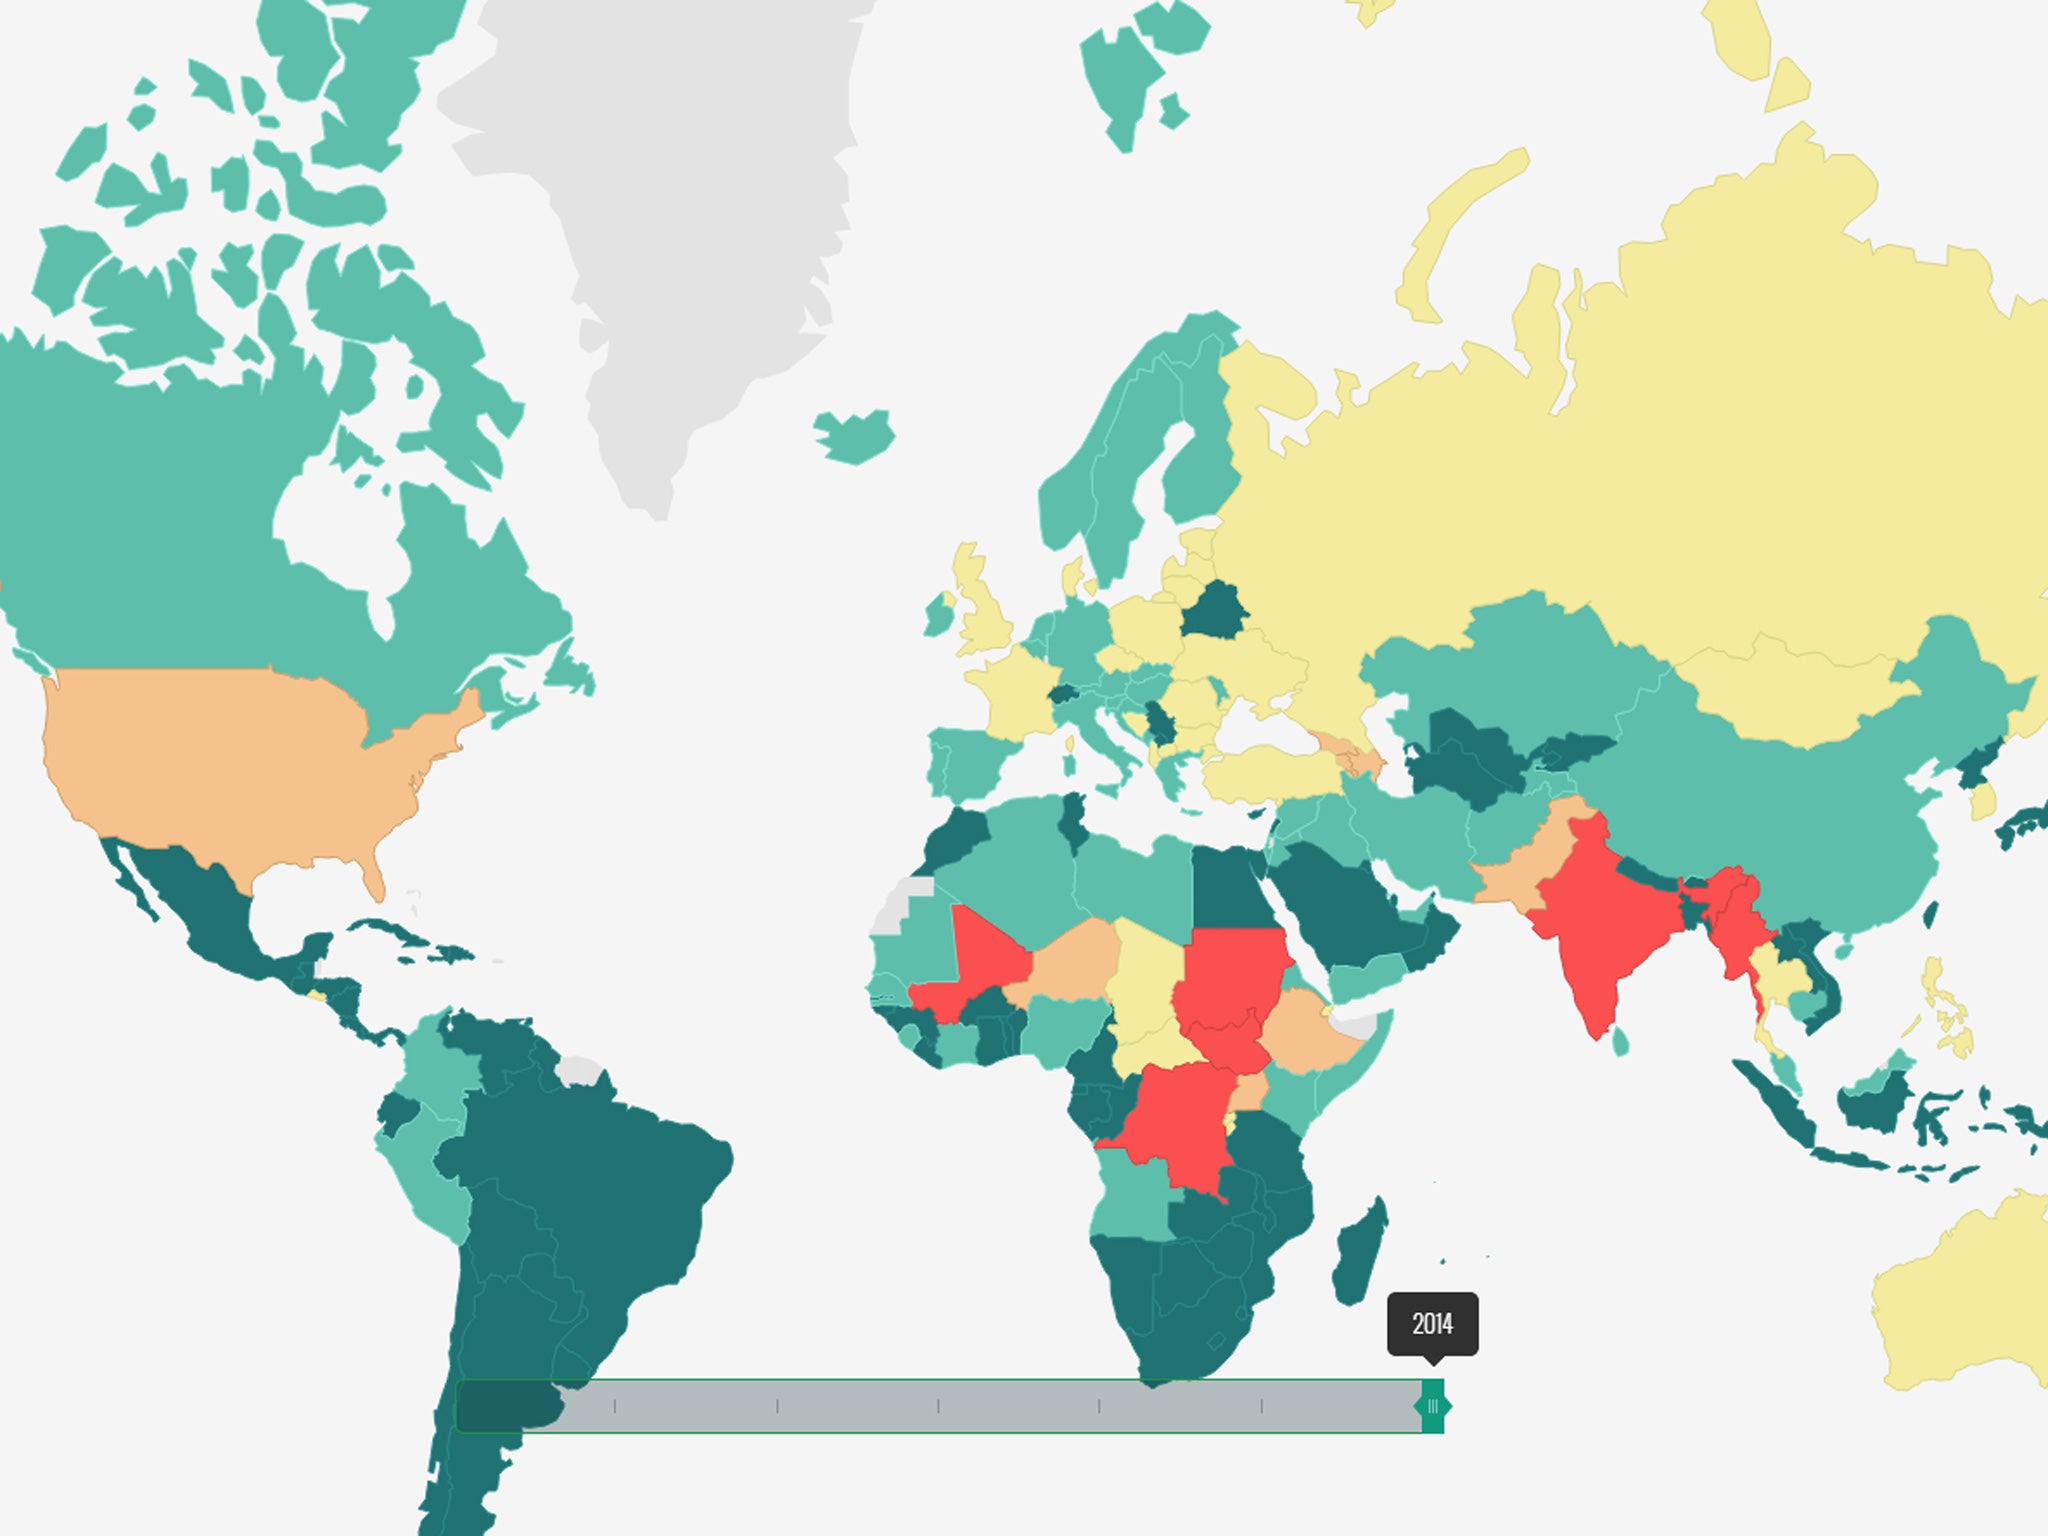 The Global Peace Index's chart showing countries involved in external conflicts which have led to more than 25 deaths